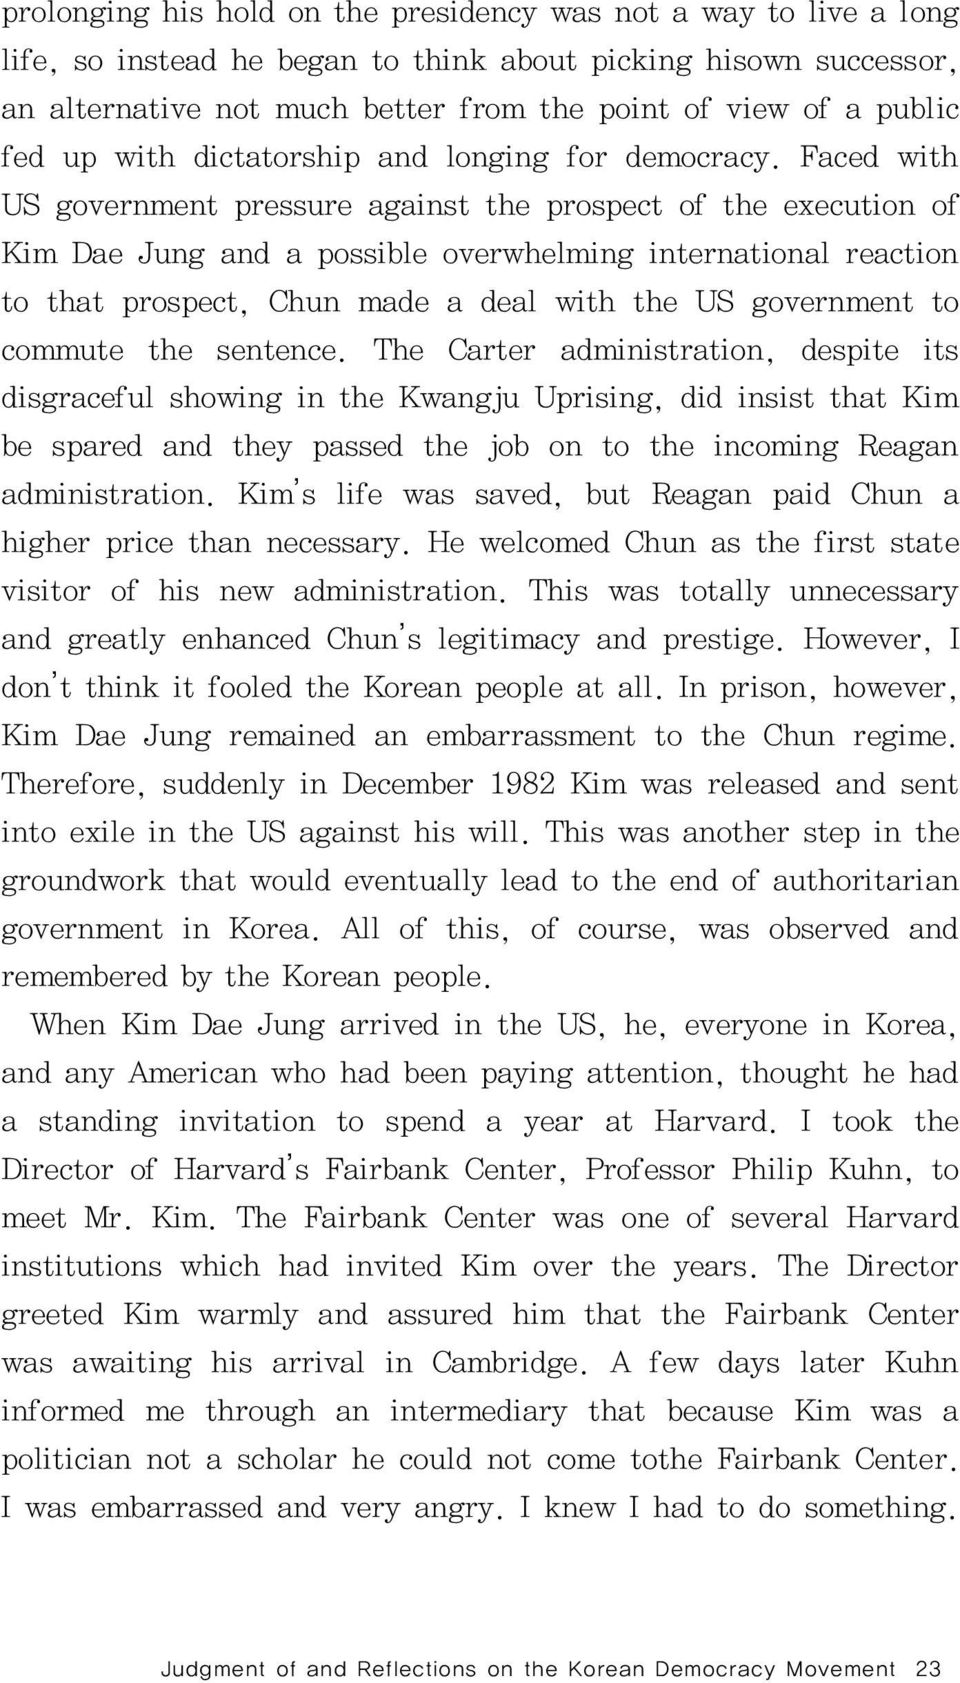 Faced with US government pressure against the prospect of the execution of Kim Dae Jung and a possible overwhelming international reaction to that prospect, Chun made a deal with the US government to